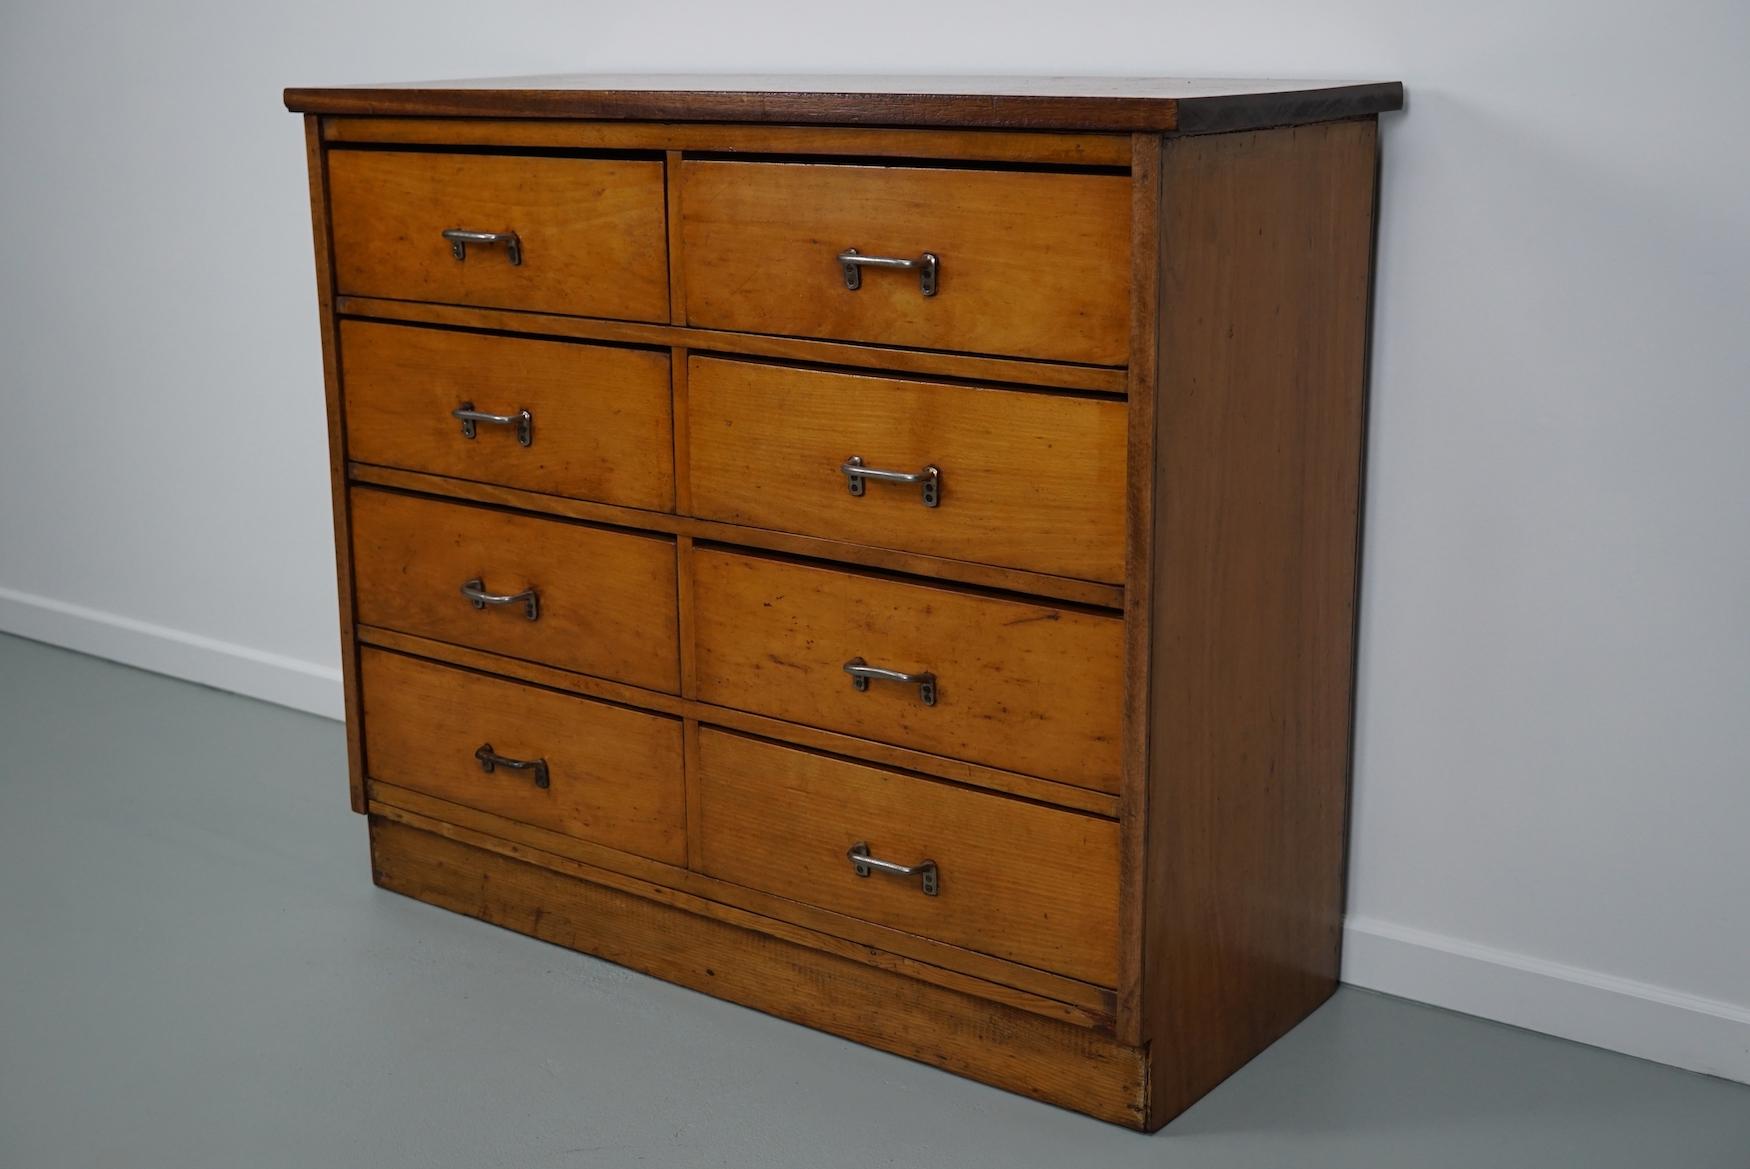 This apothecary cabinet was made circa 1950s in the Netherlands. The cabinet was used on a school to store painting supplies. It features 8 large drawers with metal industrial handles. The interior dimensions of the drawers are: D W H 32 x 45 x 14